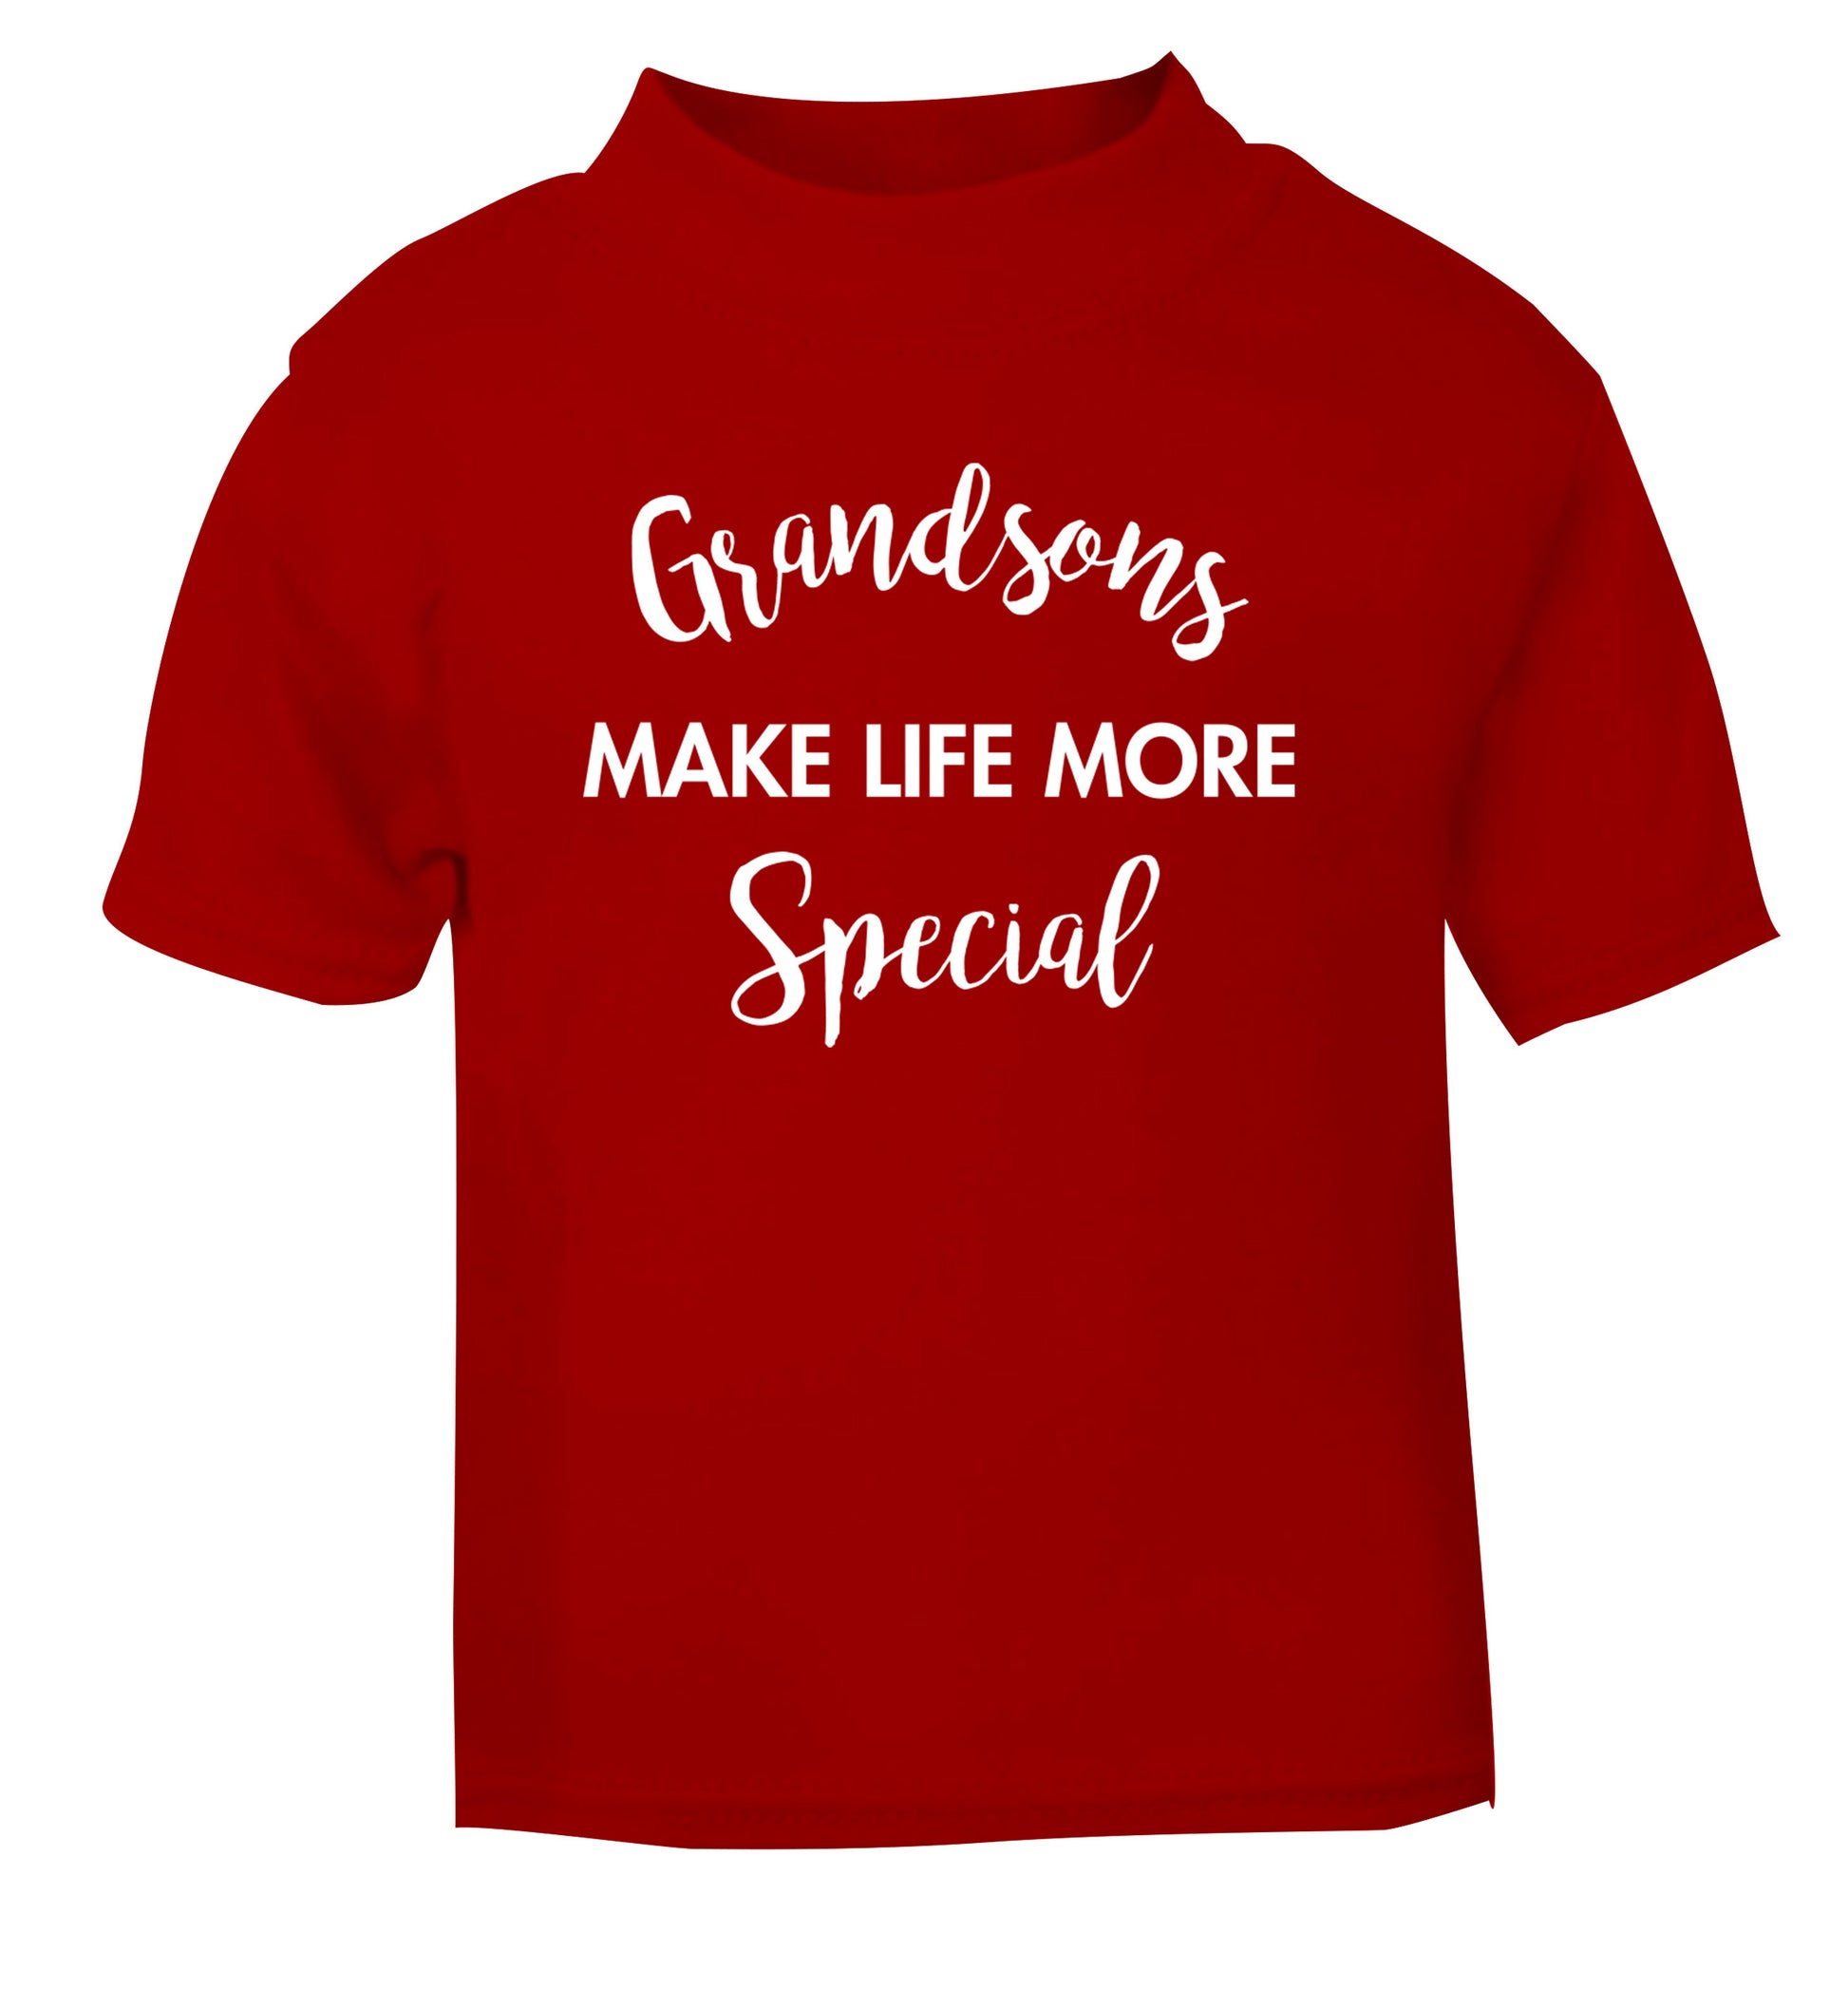 Grandsons make life more special red Baby Toddler Tshirt 2 Years